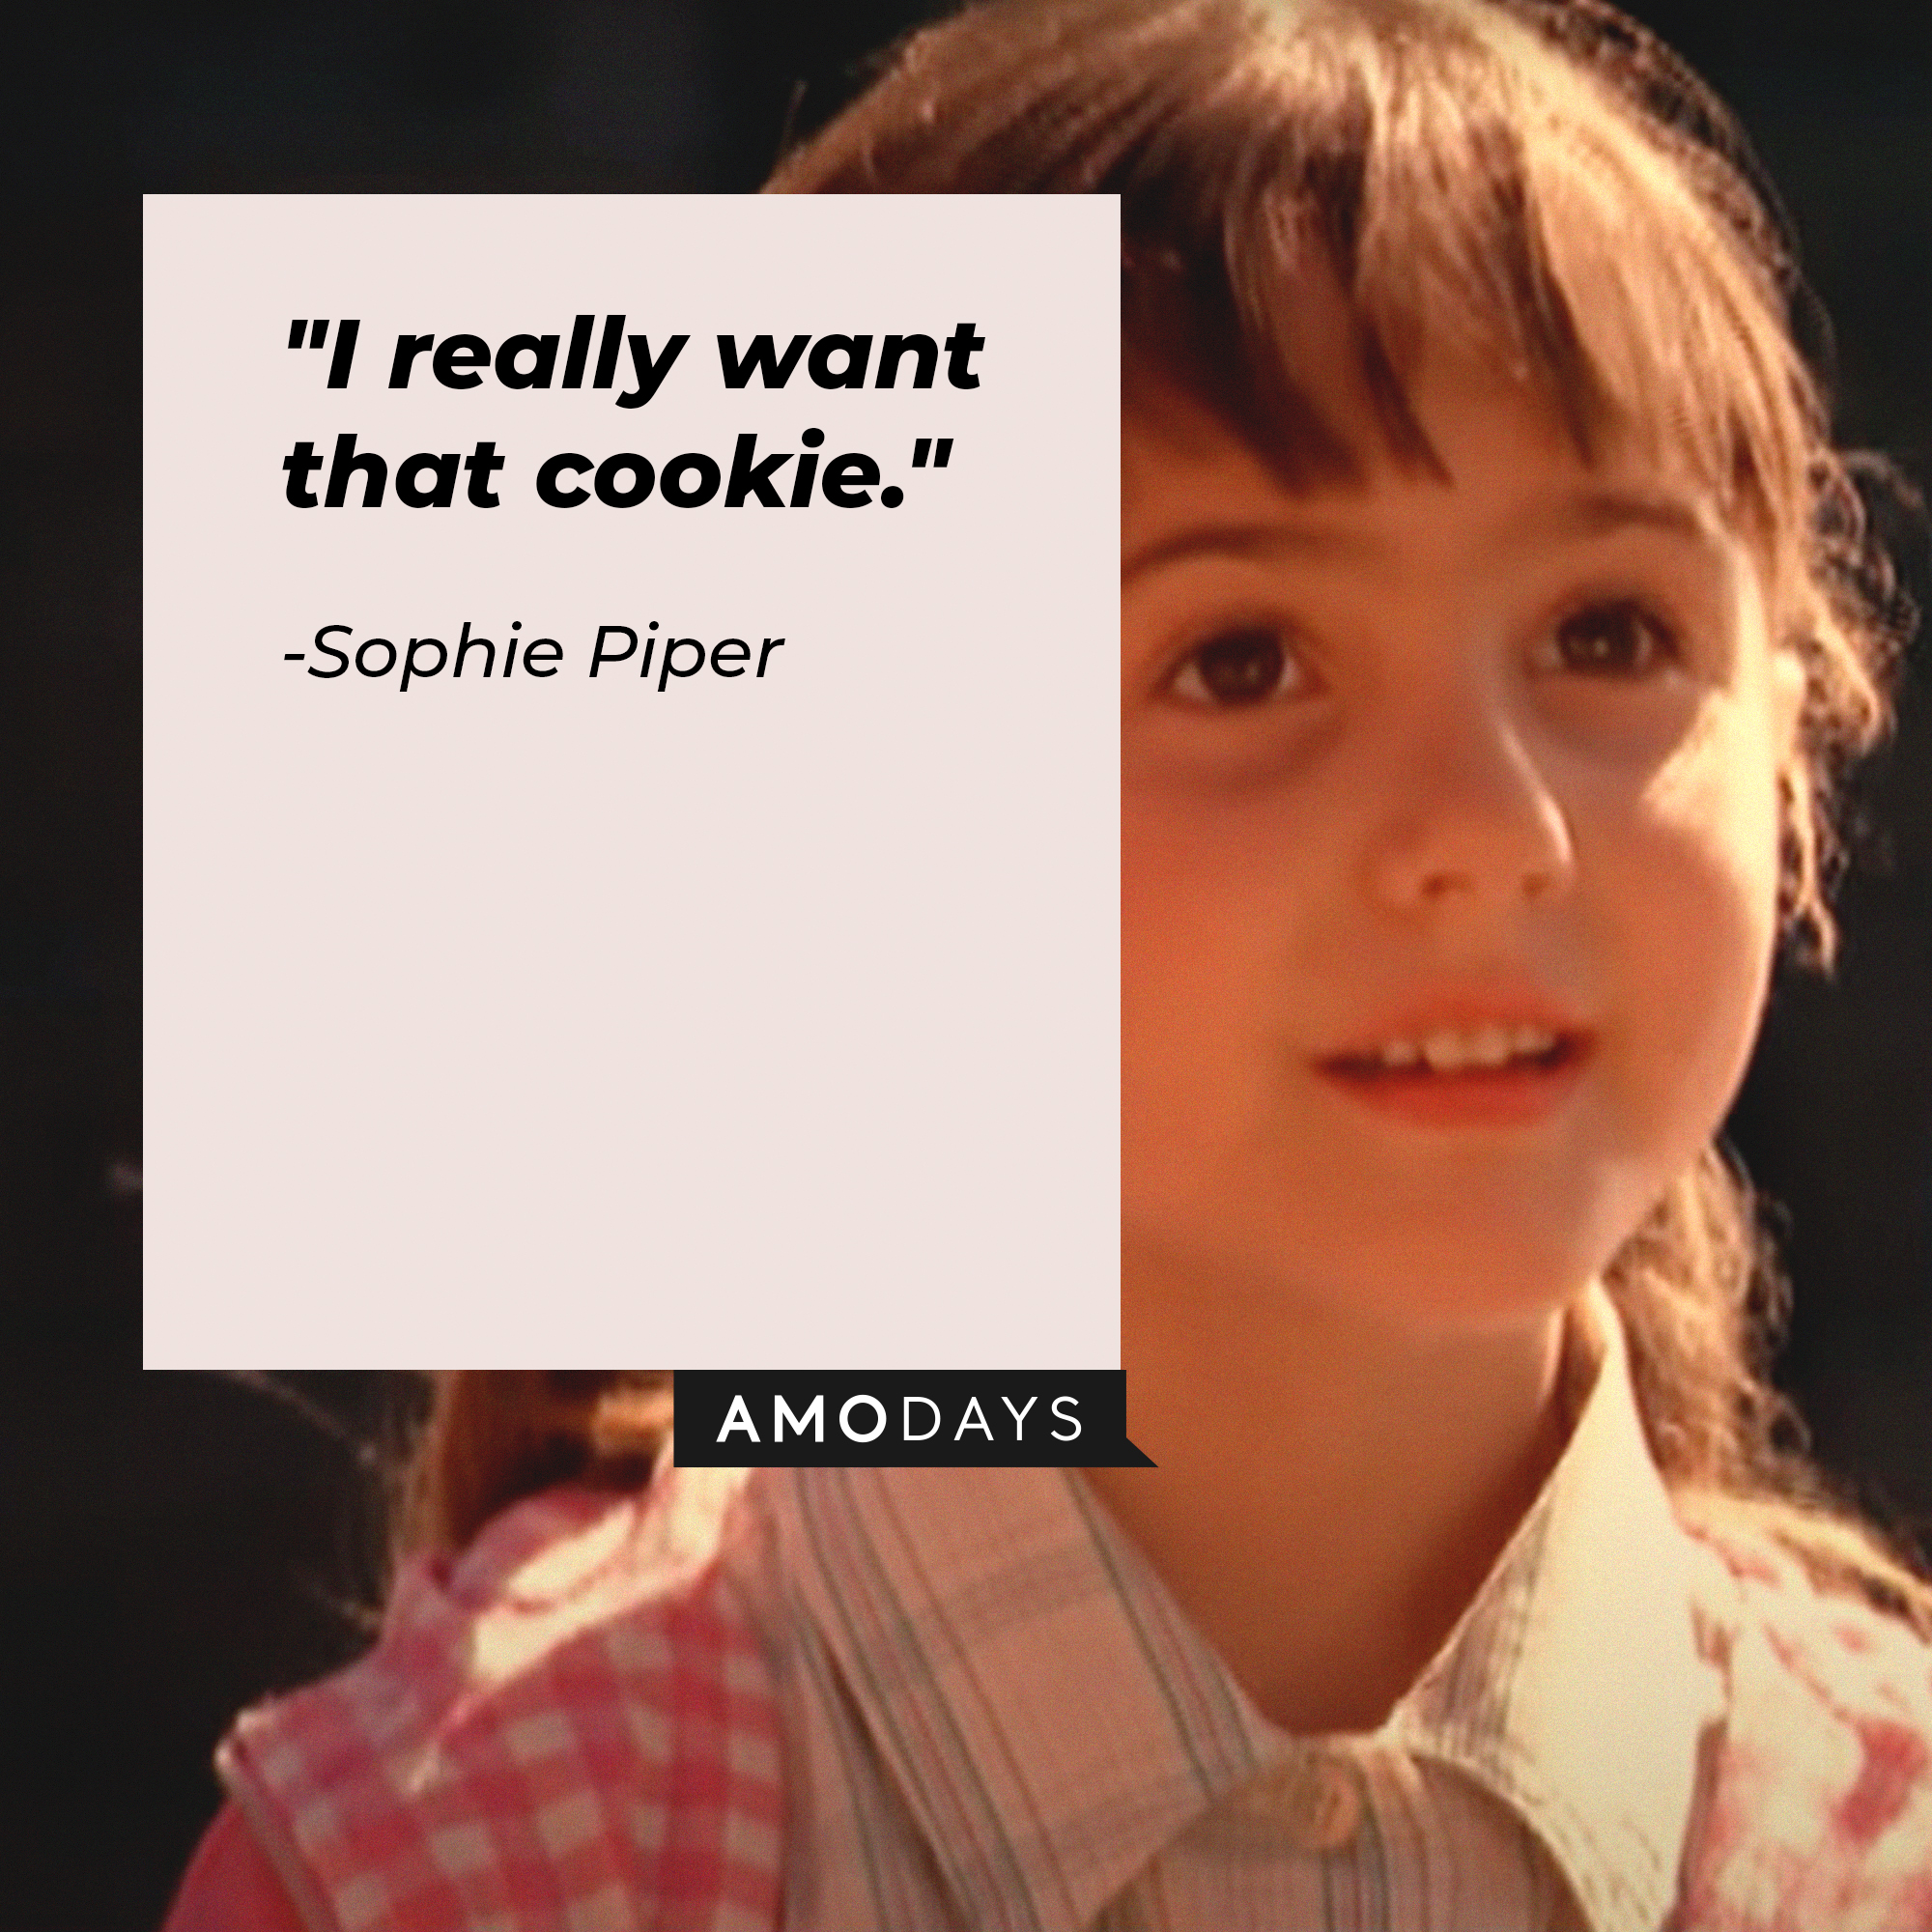 Sophie Piper's quote: "I really want that cookie." | Source: Youtube.com/disneychannel